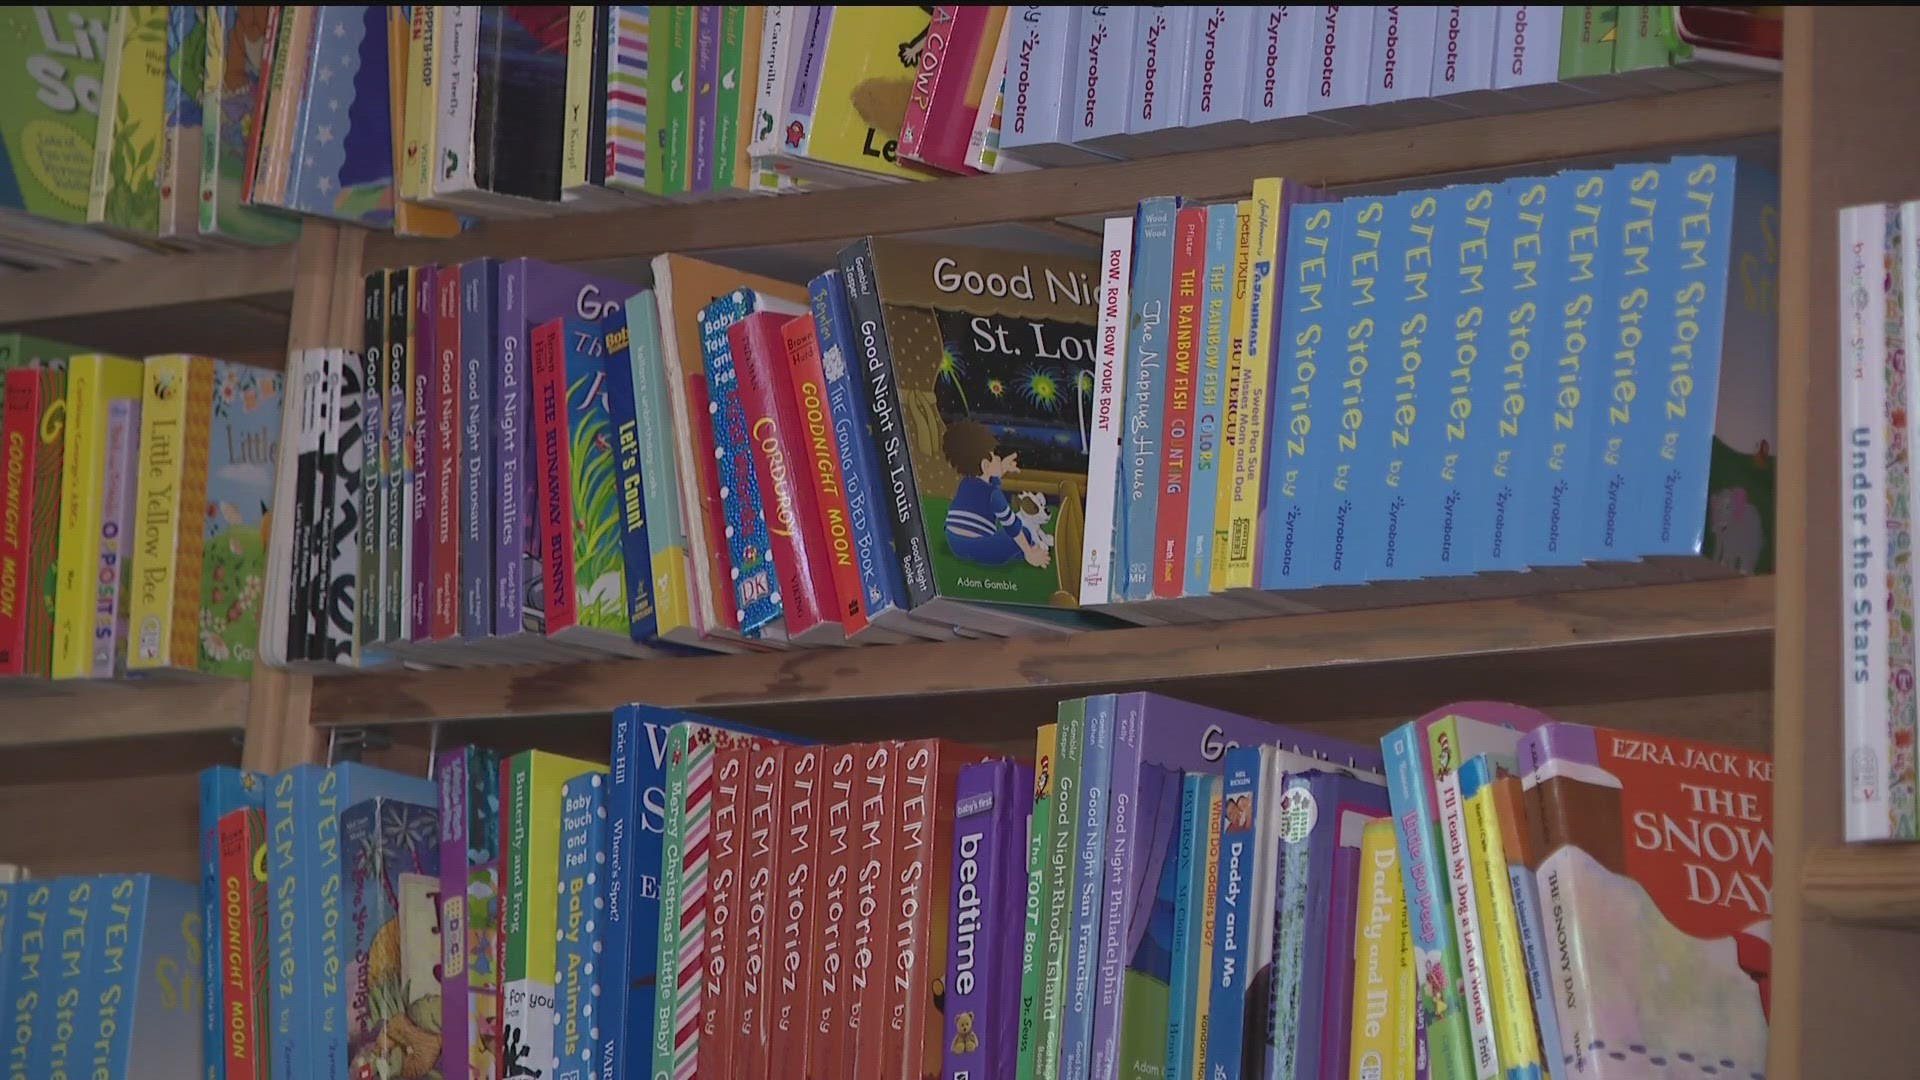 As part of National Literacy Month, we're talking to a state lawmaker and former APS chairman about the importance of helping kids learn to read at a young age.